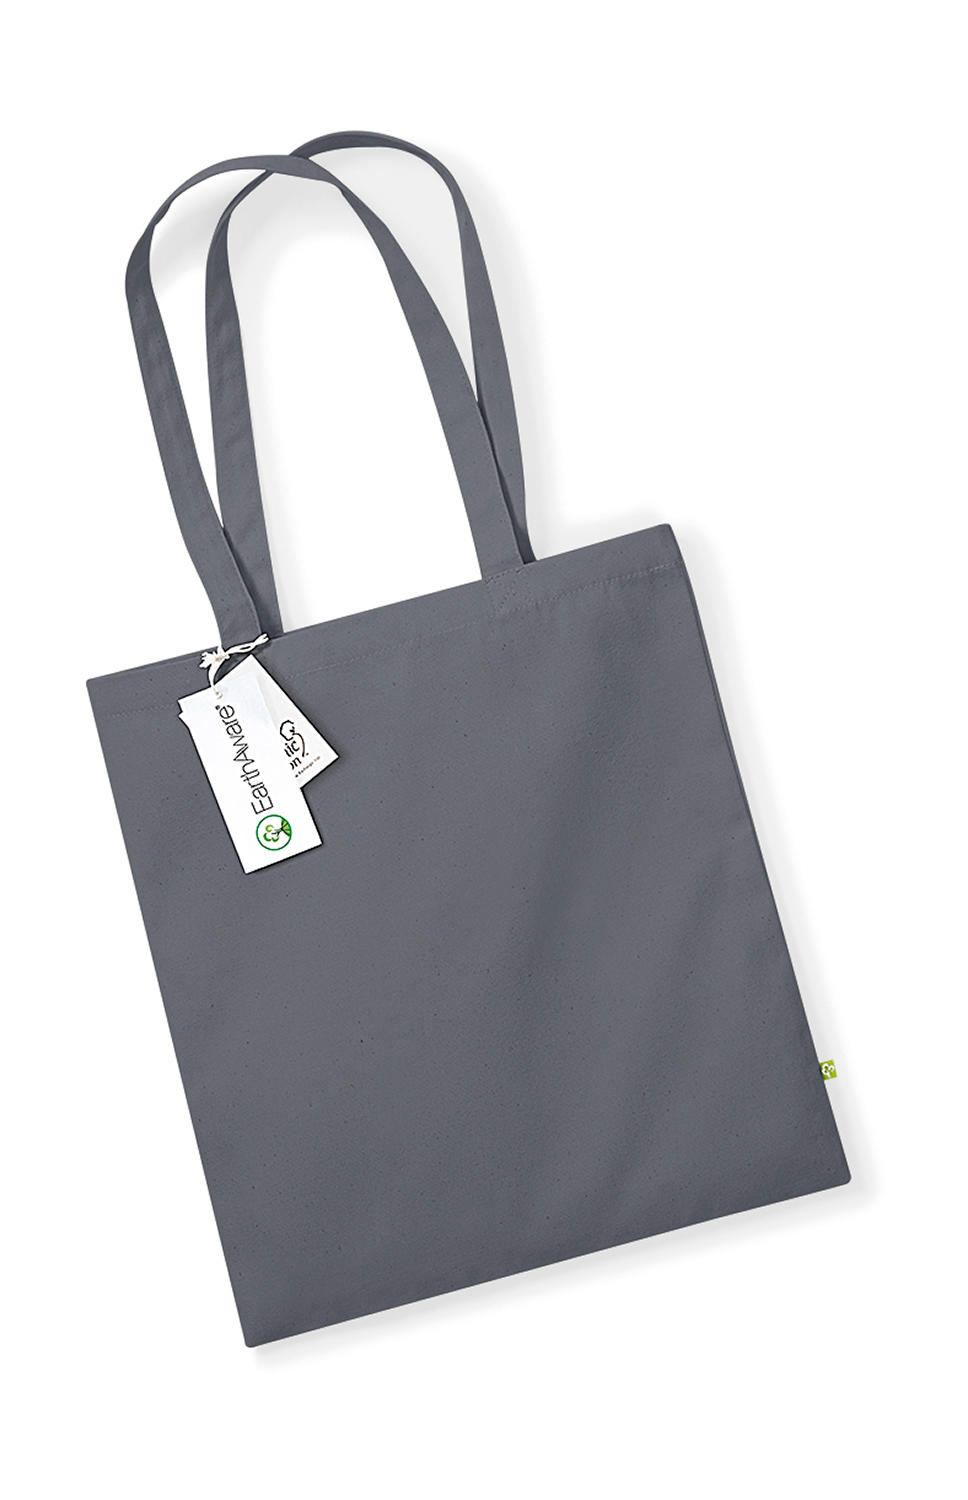  EarthAware? Organic Bag for Life in Farbe Graphite Grey